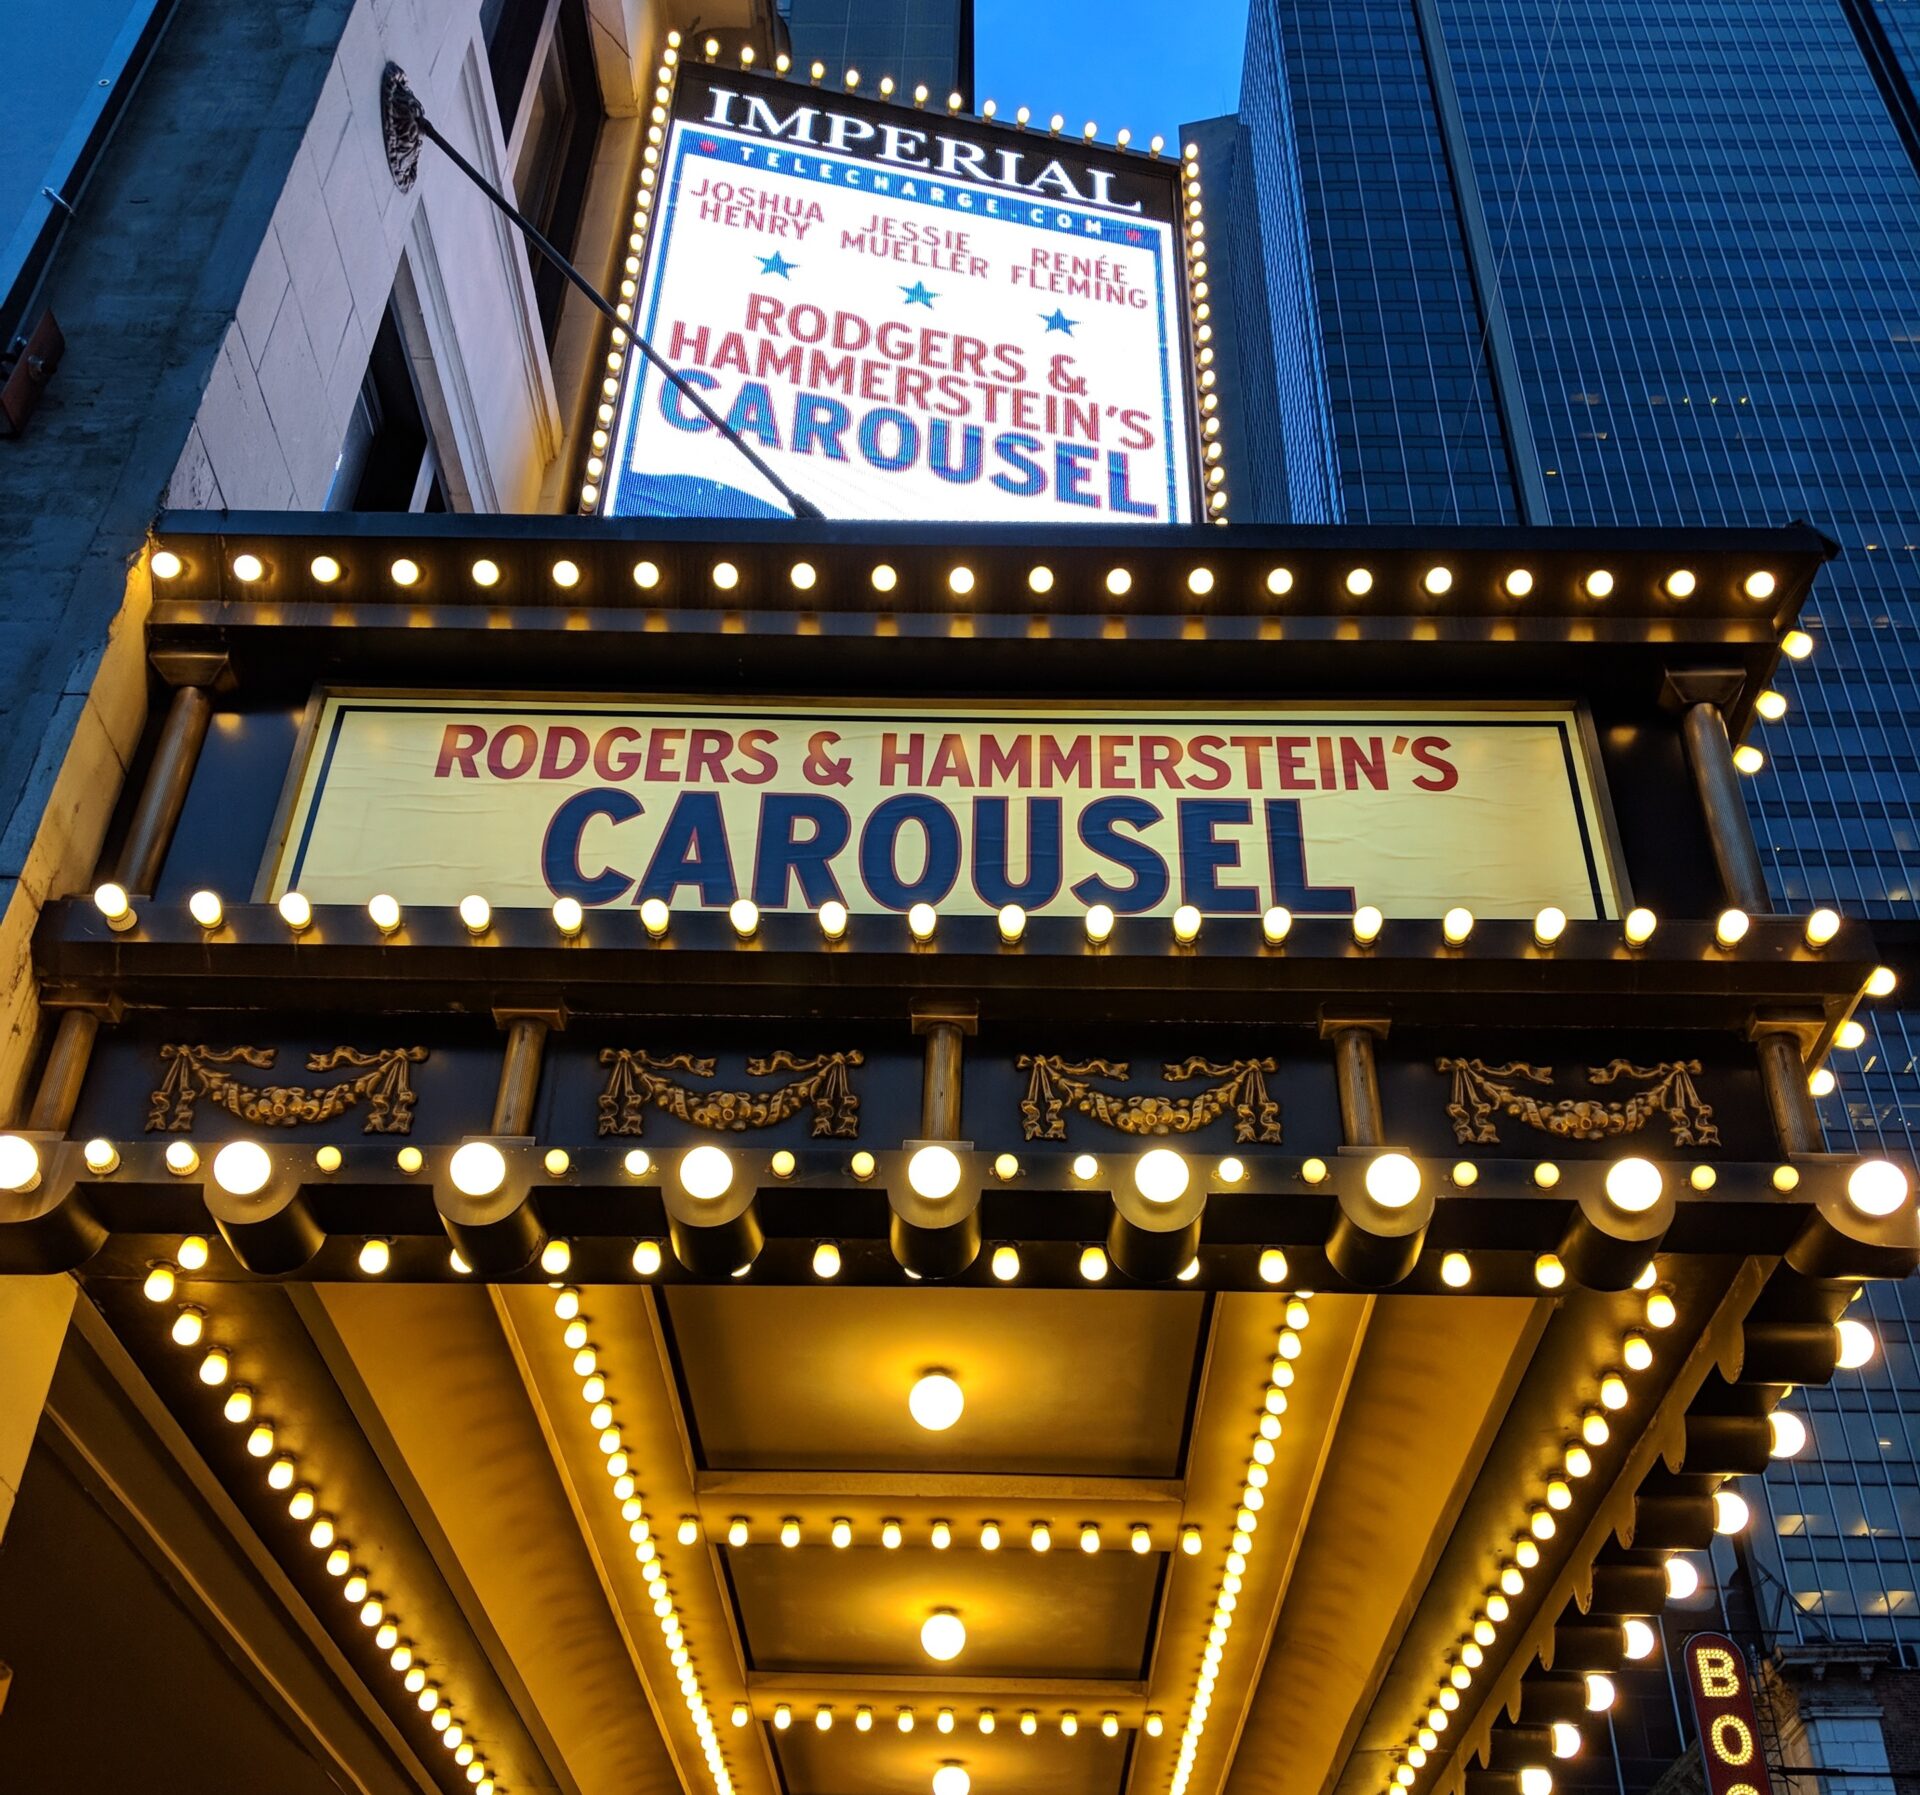 The Carousel Broadway Revival Marquee